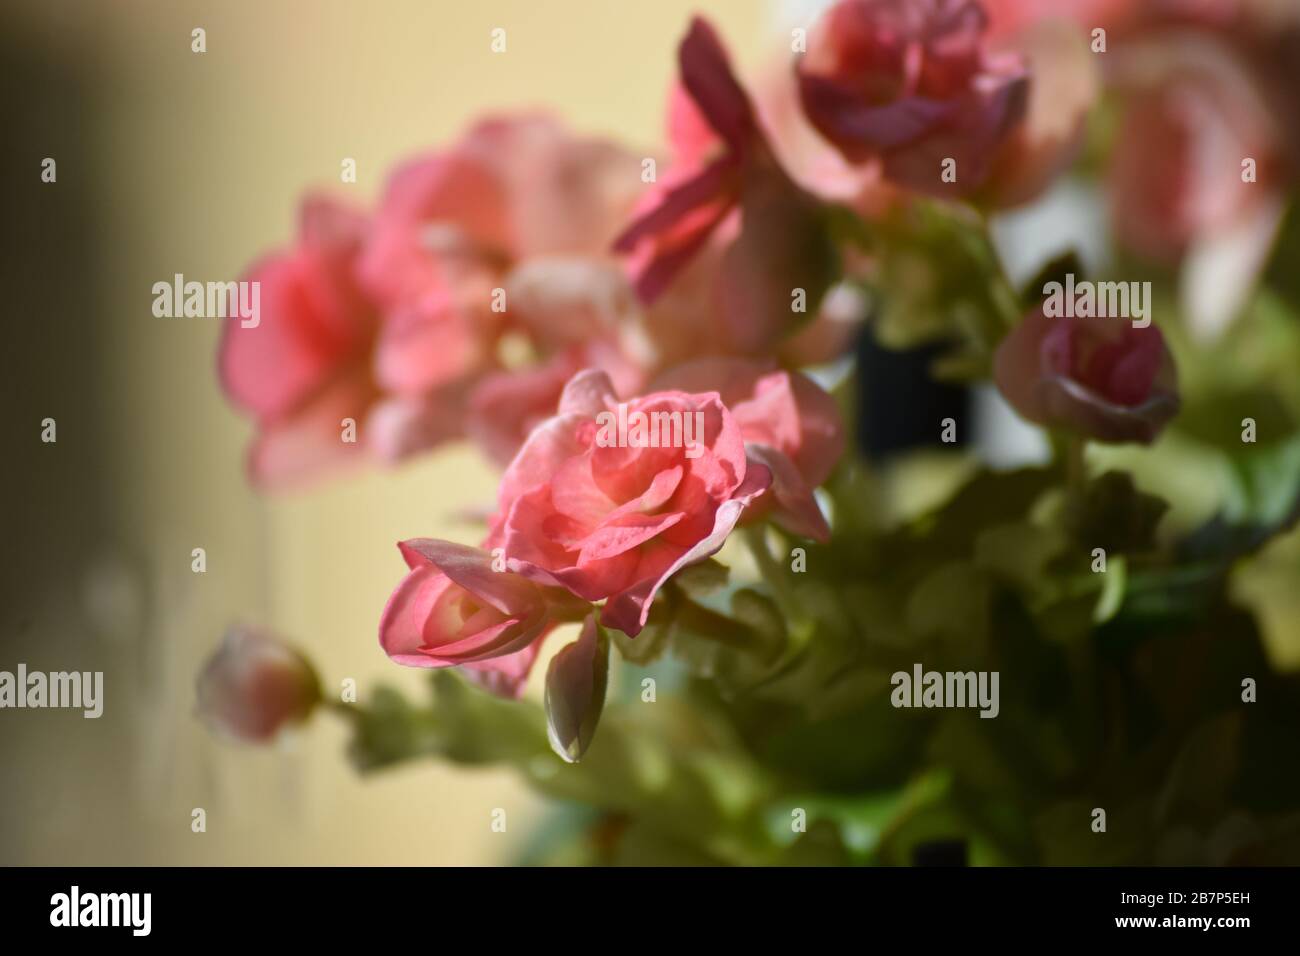 the delicate Flowers of a Begonia Stock Photo